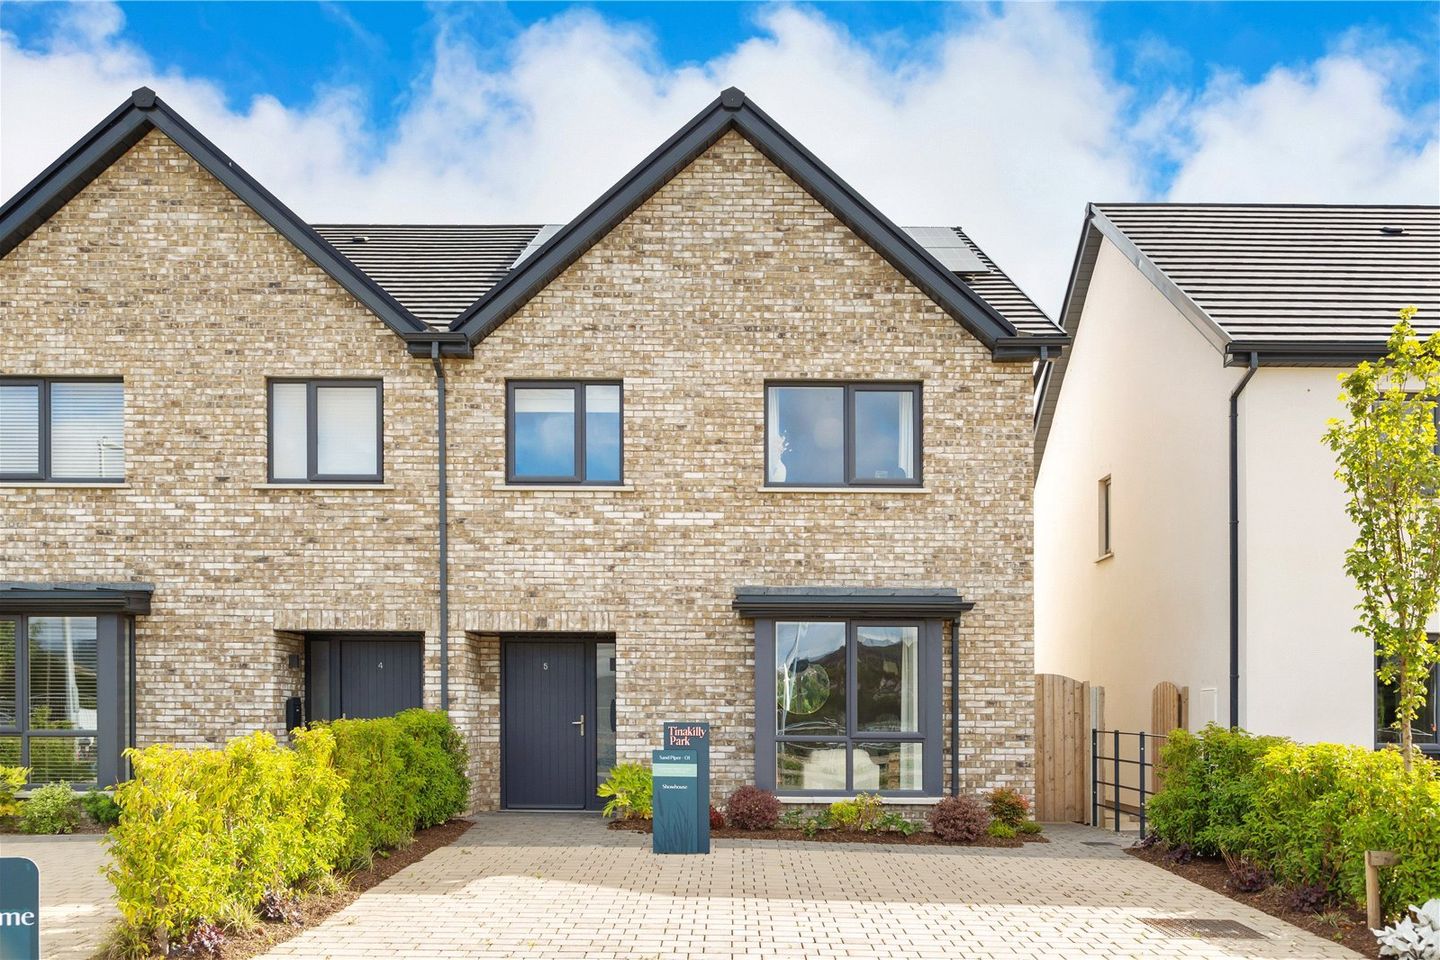 5 Vartry Grove, Tinakilly Park, Rathnew, Rathnew, Co. Wicklow, A67W026